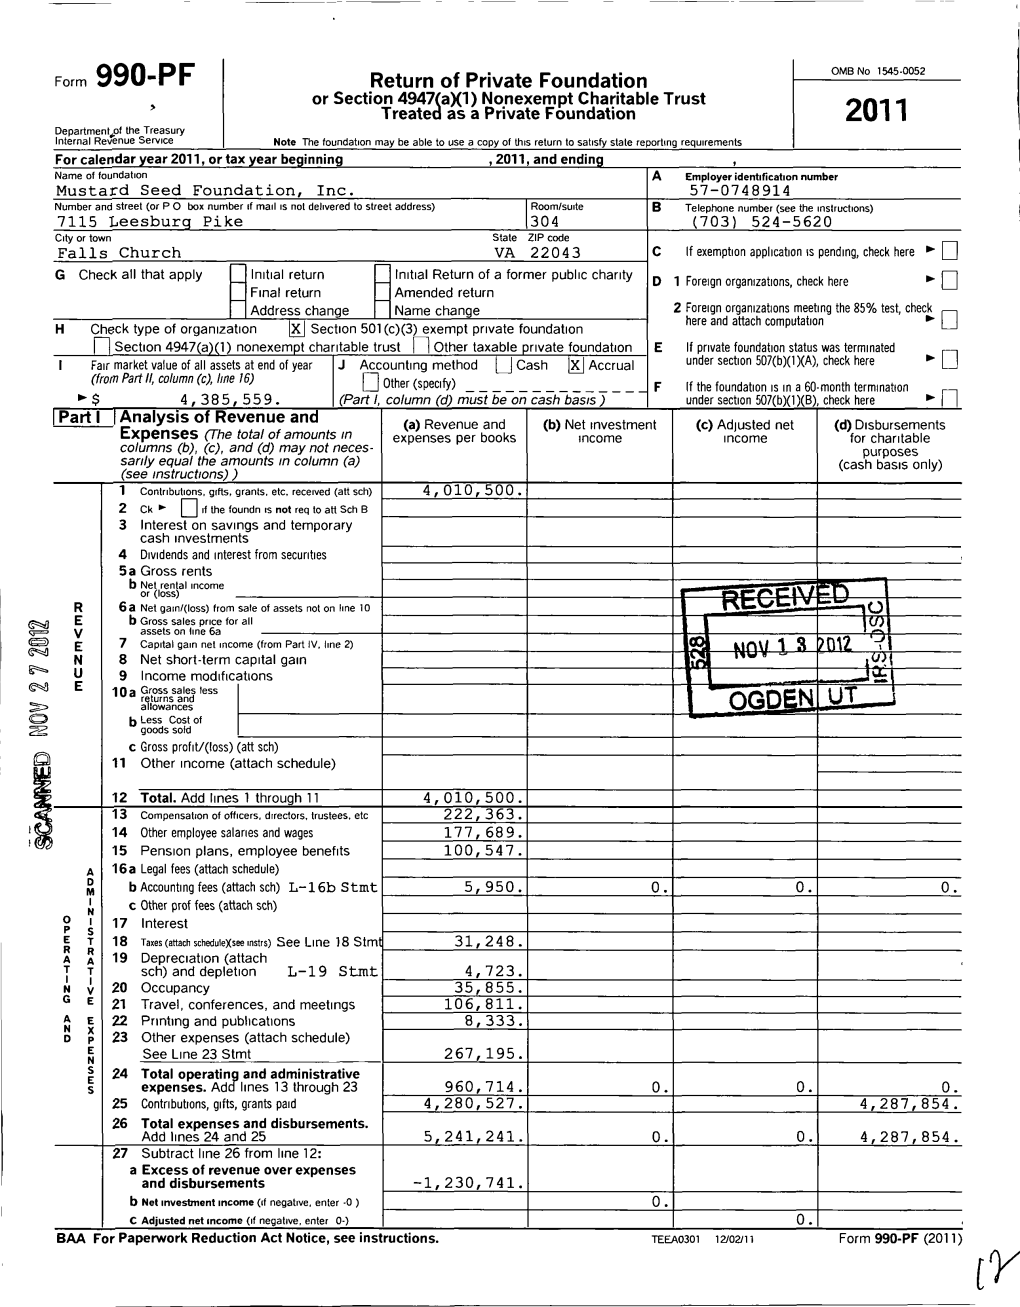 Form 990-PF 2011 Internal Revenue Service Name of the Organization Employer Identification Number Mustard Seed Foundation, Inc